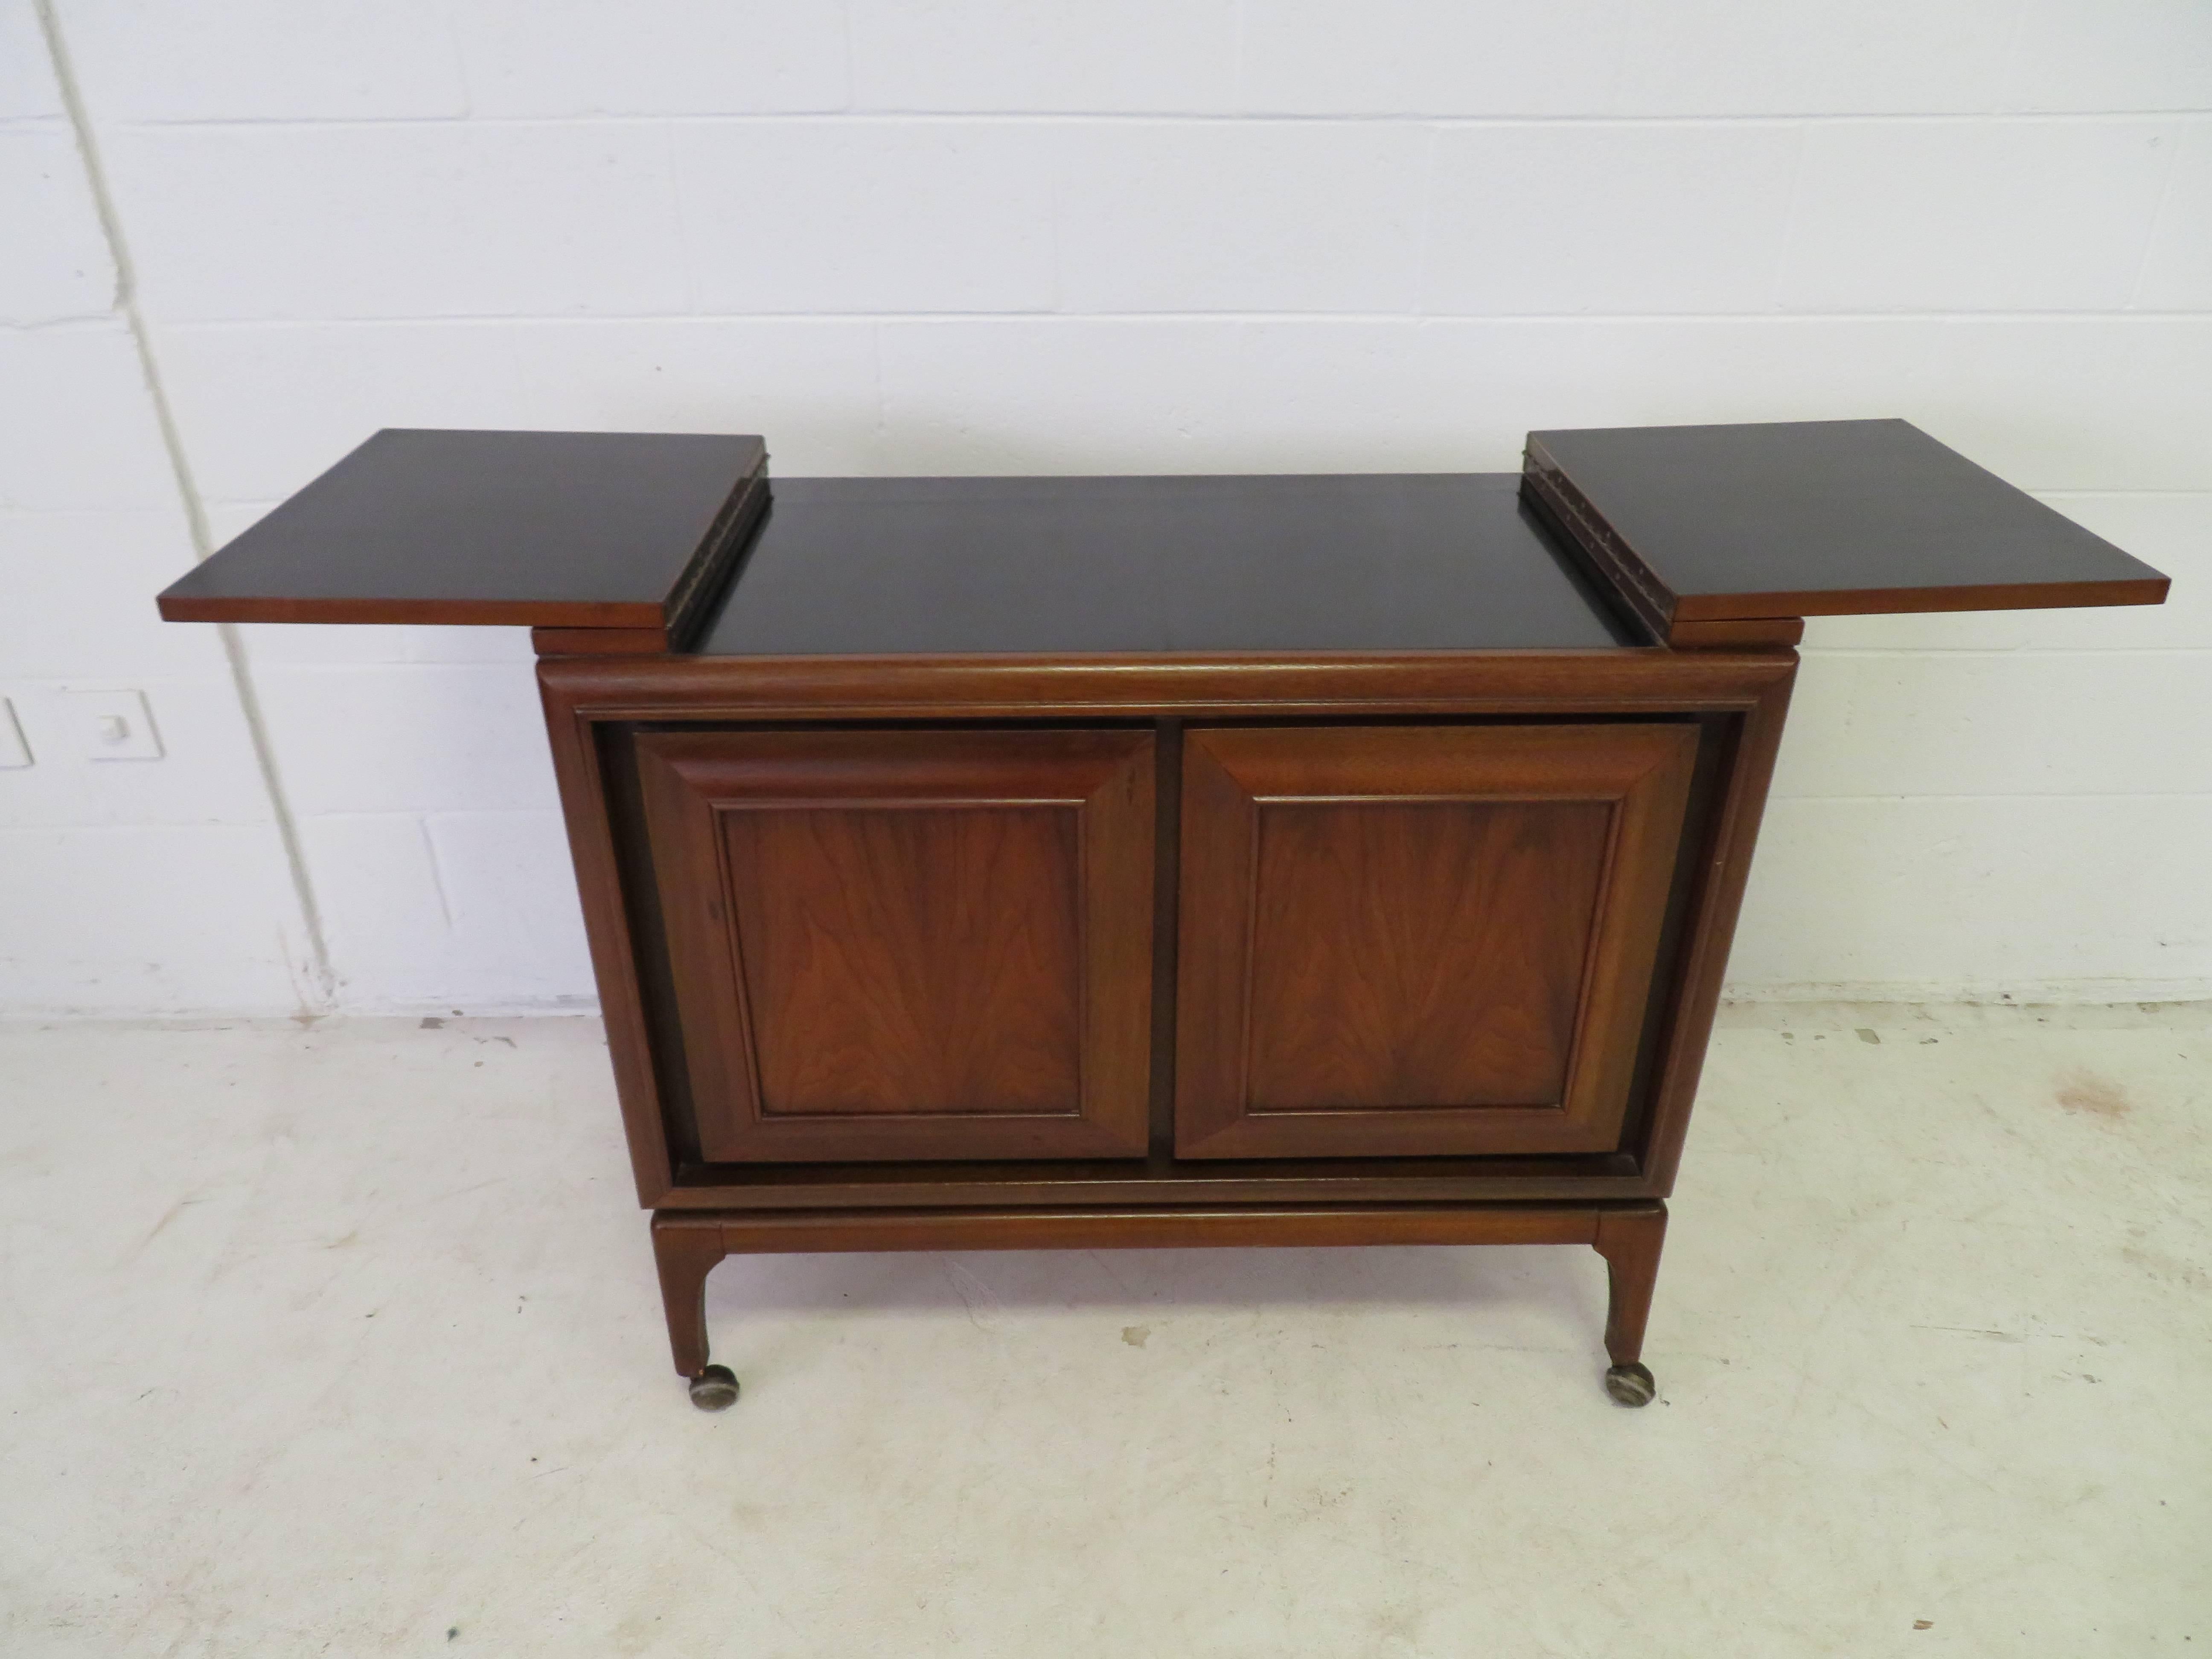 Handsome American Mid-Century Modern walnut rolling bar cart. The top flip open to reveal a nice black formica surface-great for mixing cocktails or used as an extra serving space during parties. The two doors open to reveal one divided drawer and